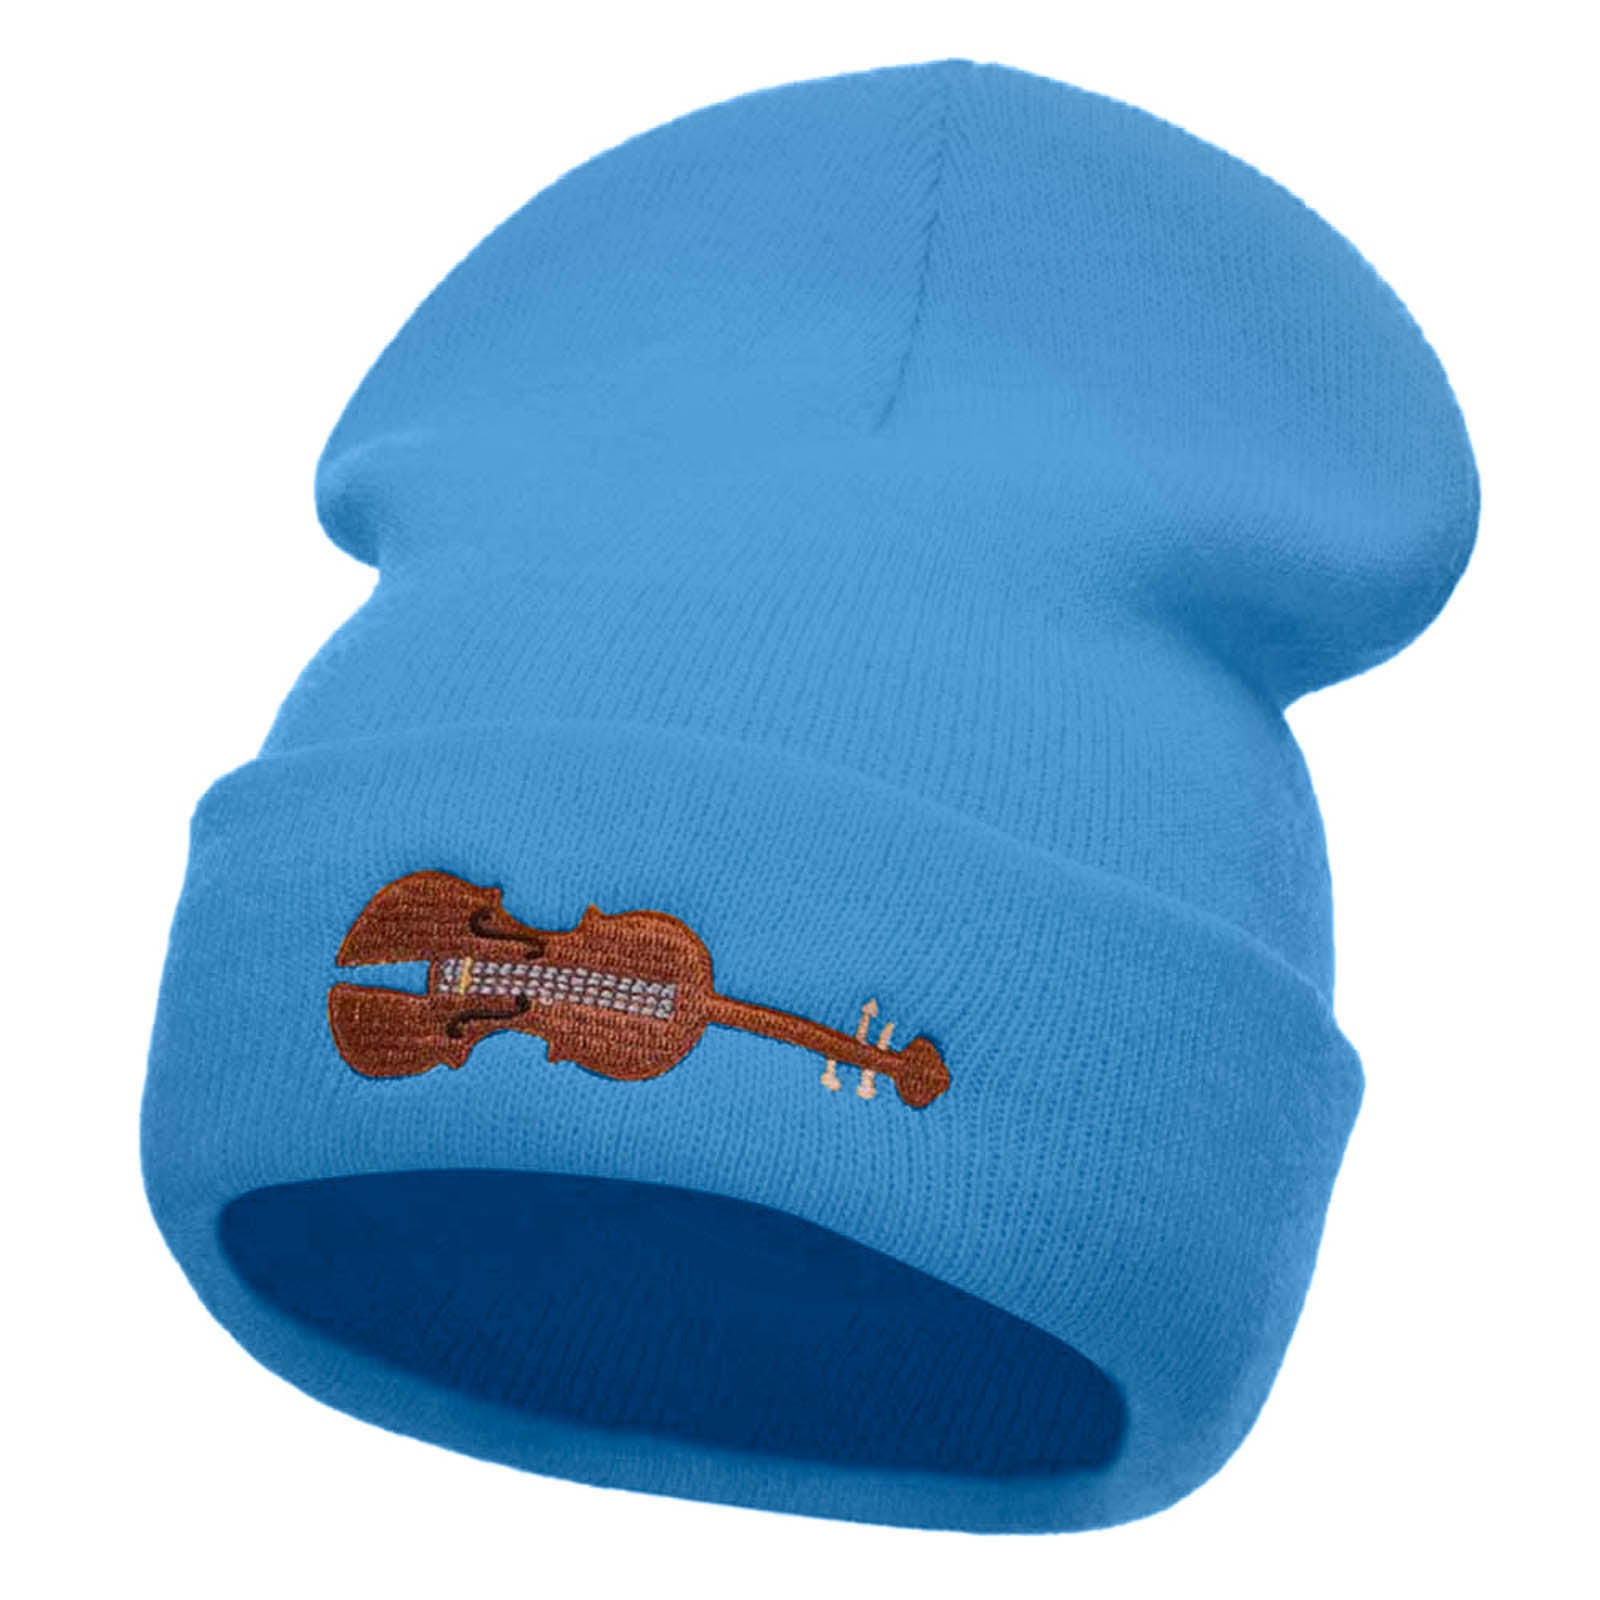 Violin Embroidered 12 Inch Long Knitted Beanie - Sky Blue OSFM